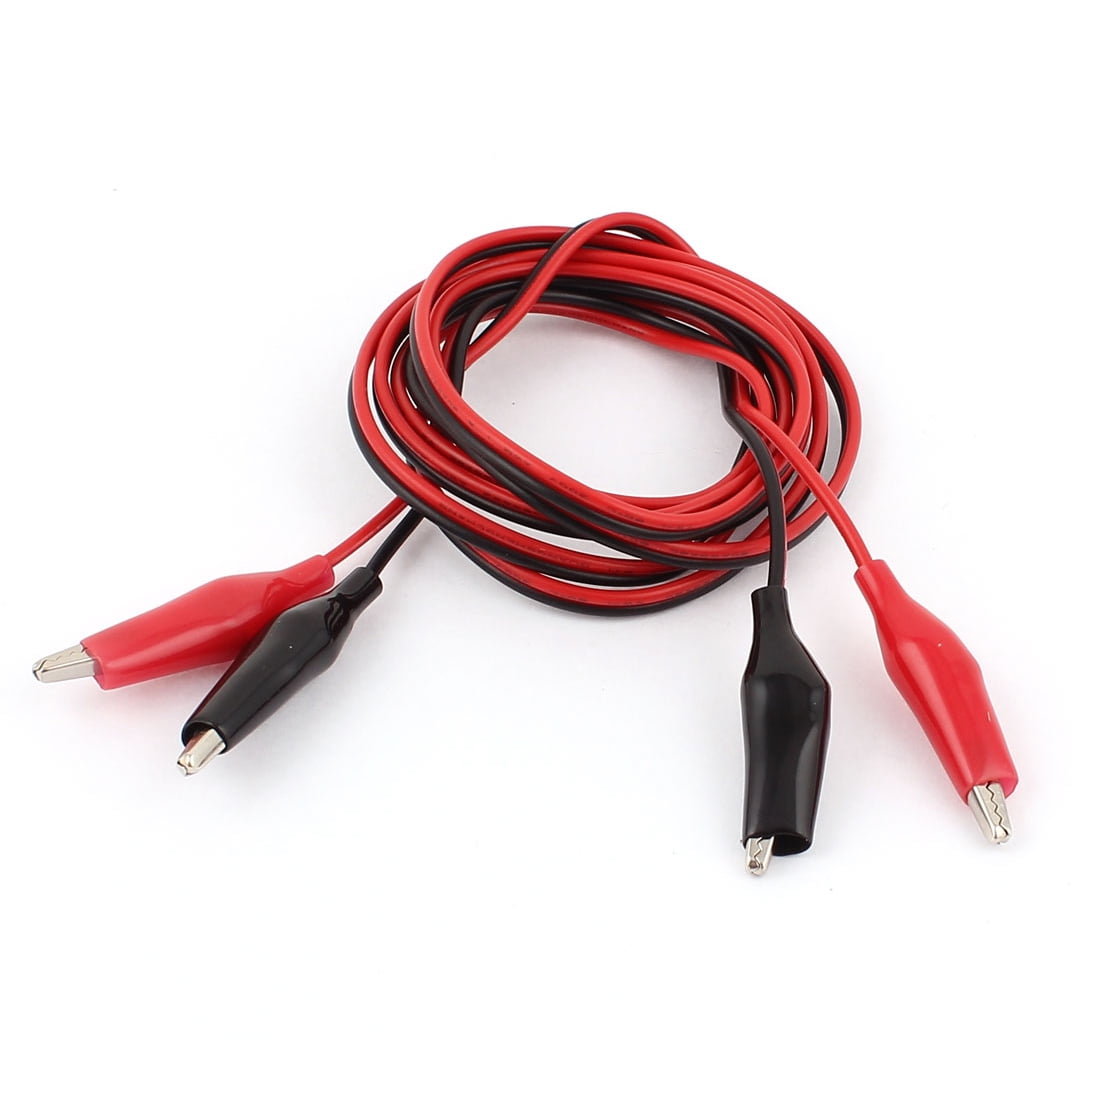 Crocodile Alligator Double-ended Clip Test Jumper Probe Lead Wire Cable 